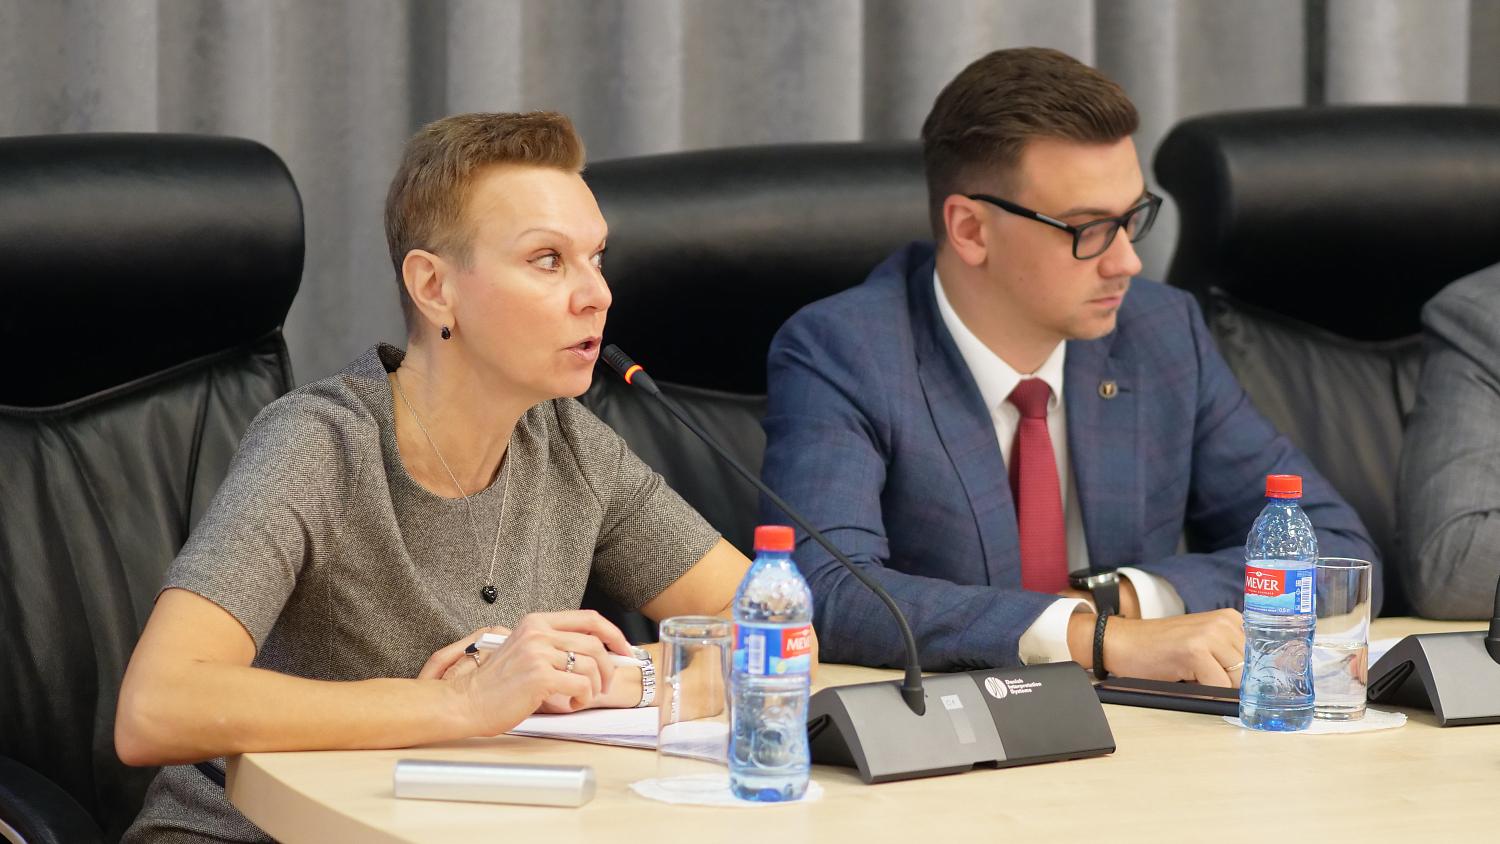 Entrepreneurs from Poland and Russia held negotiations at the MCCI